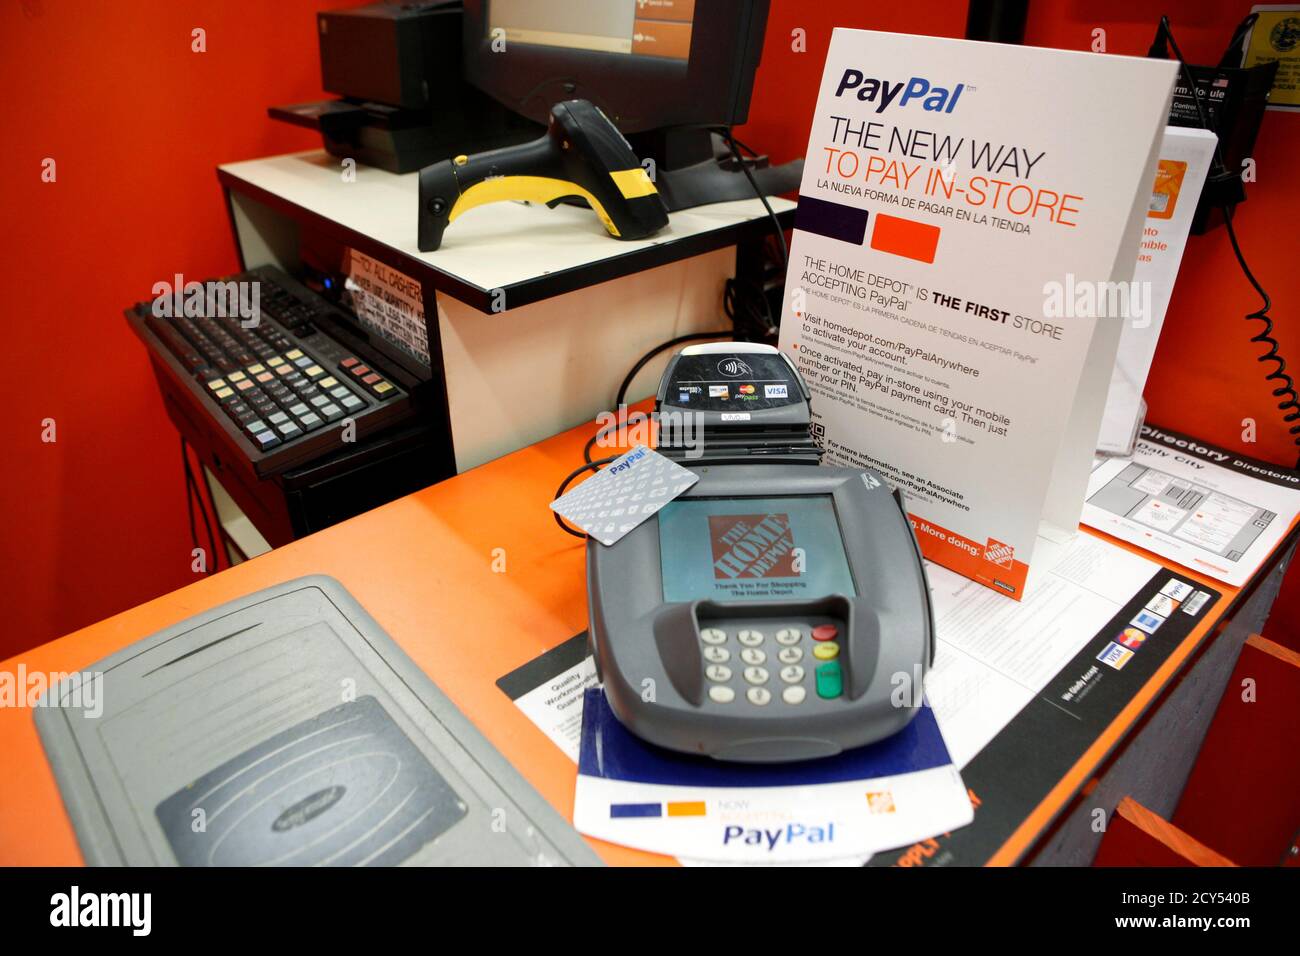 A sign showing customers' ability to now pay with their PayPal account sits  at a cashier station at a Home Depot store in Daly City, California,  February 21, 2012. EBay Inc, which